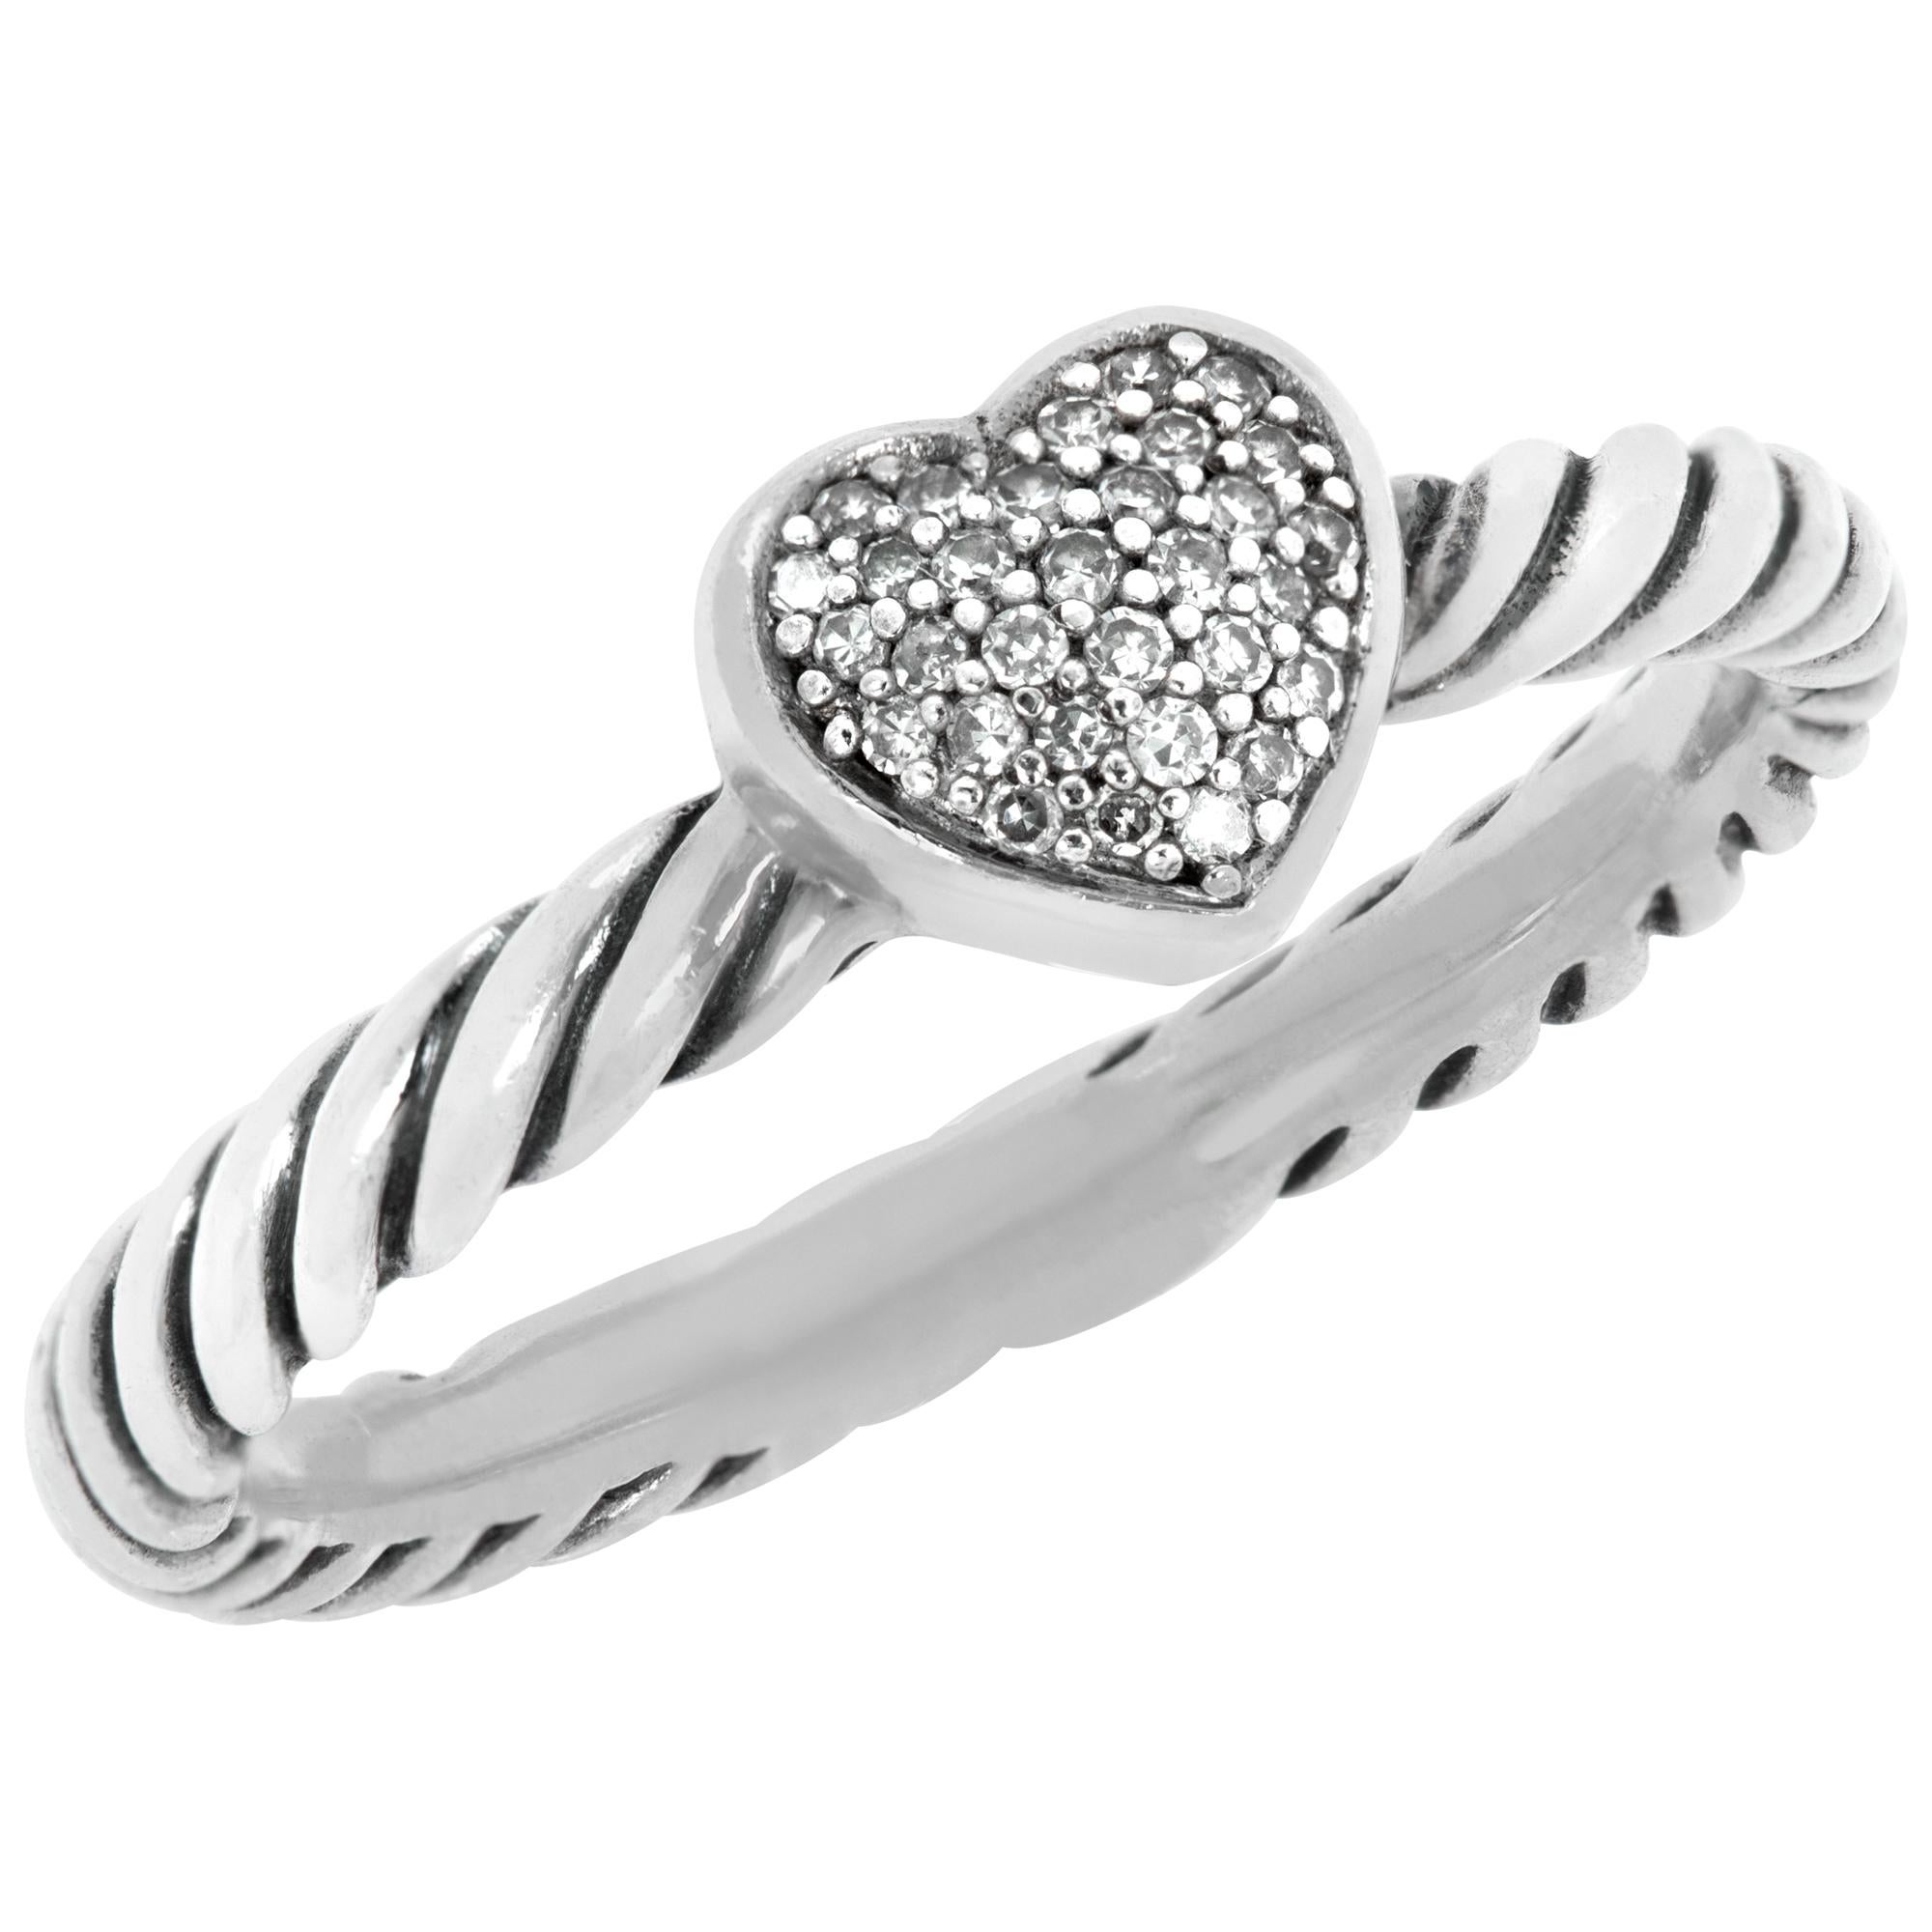 David Yurman diamond sterling silver pave heart ring In Excellent Condition For Sale In Surfside, FL